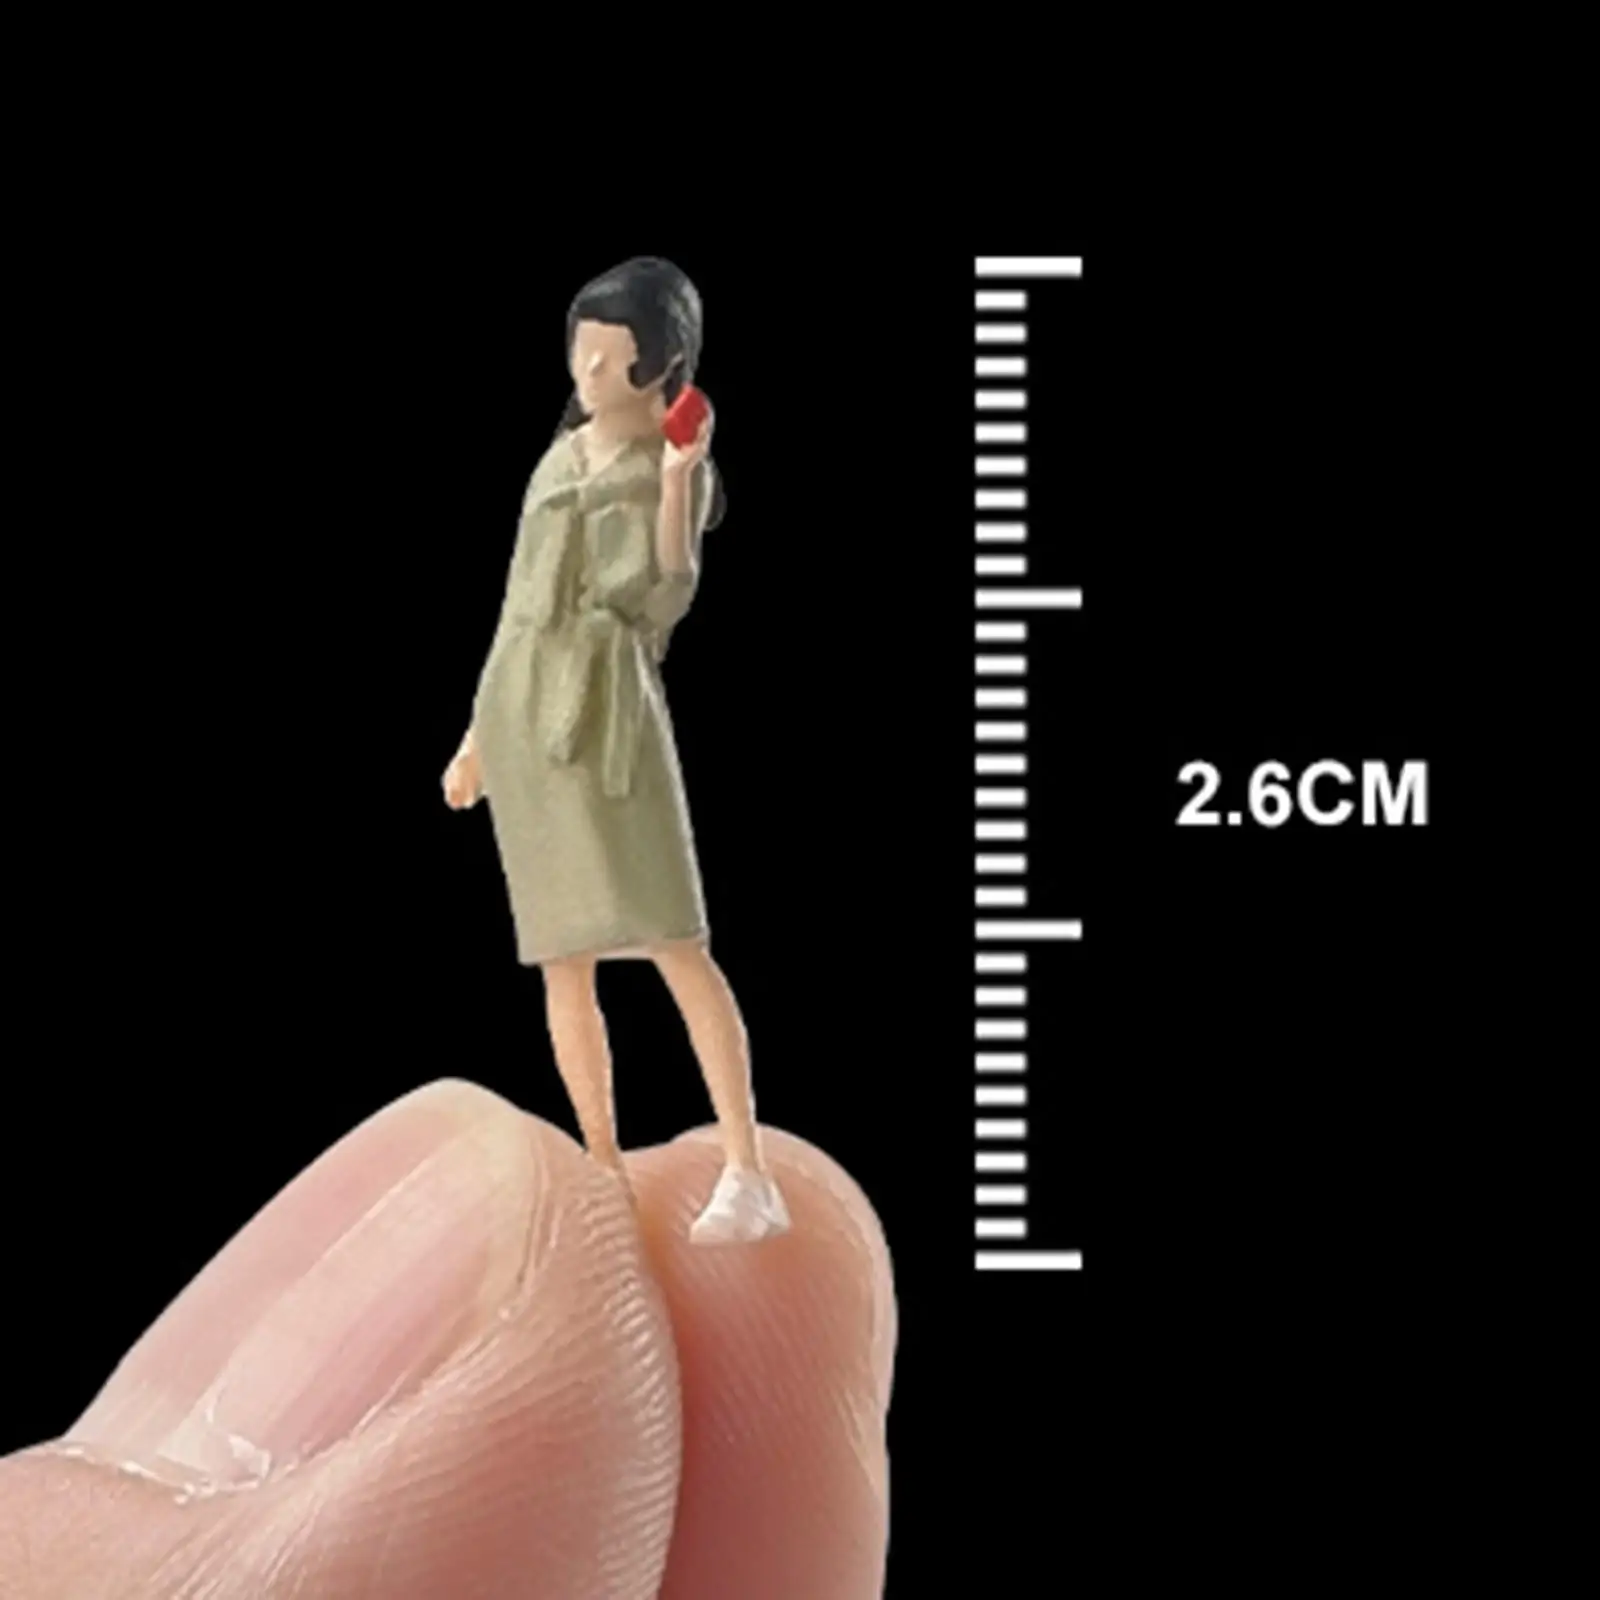 Painted Figures Architectural Realistic with Cola Resin Role Play Figure Girl People Figurine for Miniature Scene Sand Table